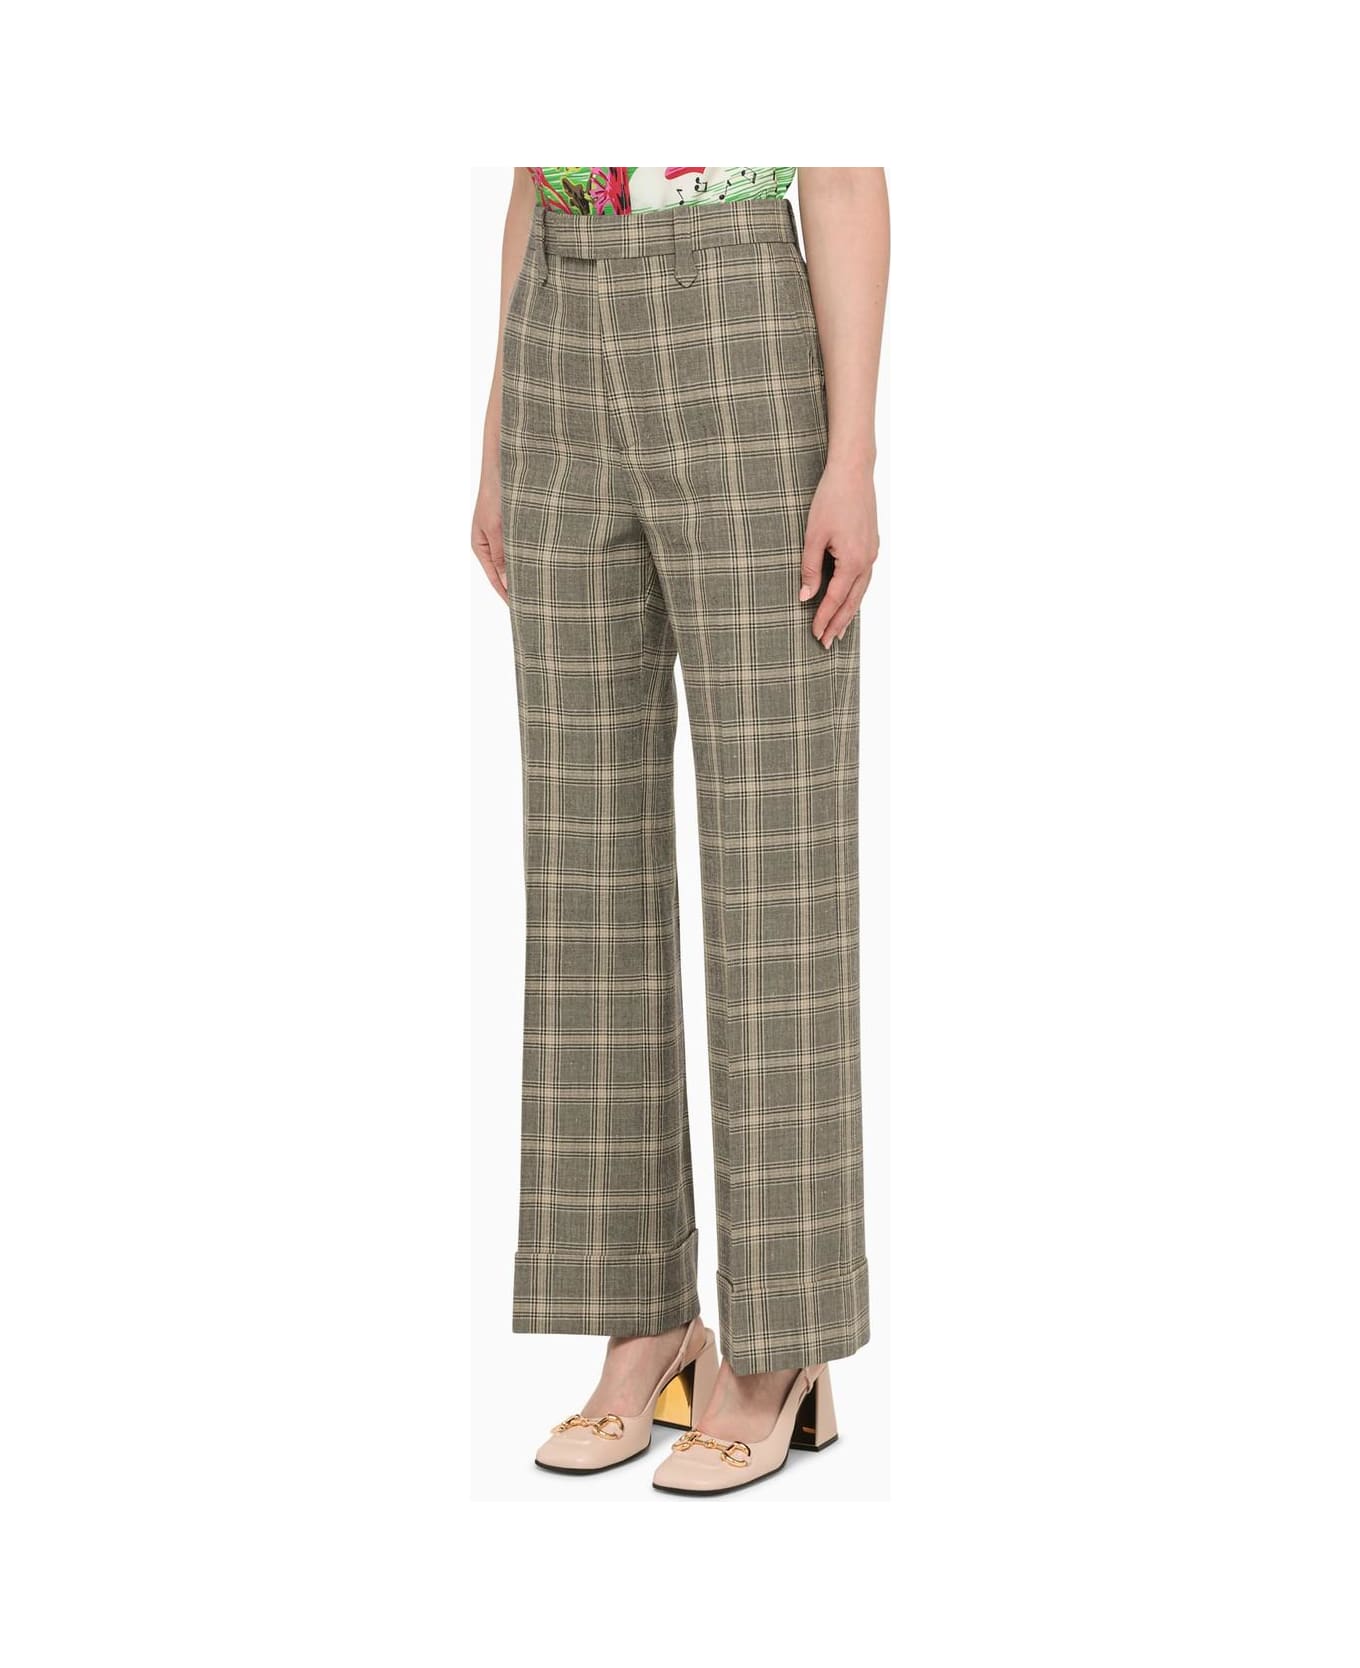 Gucci Prince Of Wales Check Trousers - Grey ボトムス